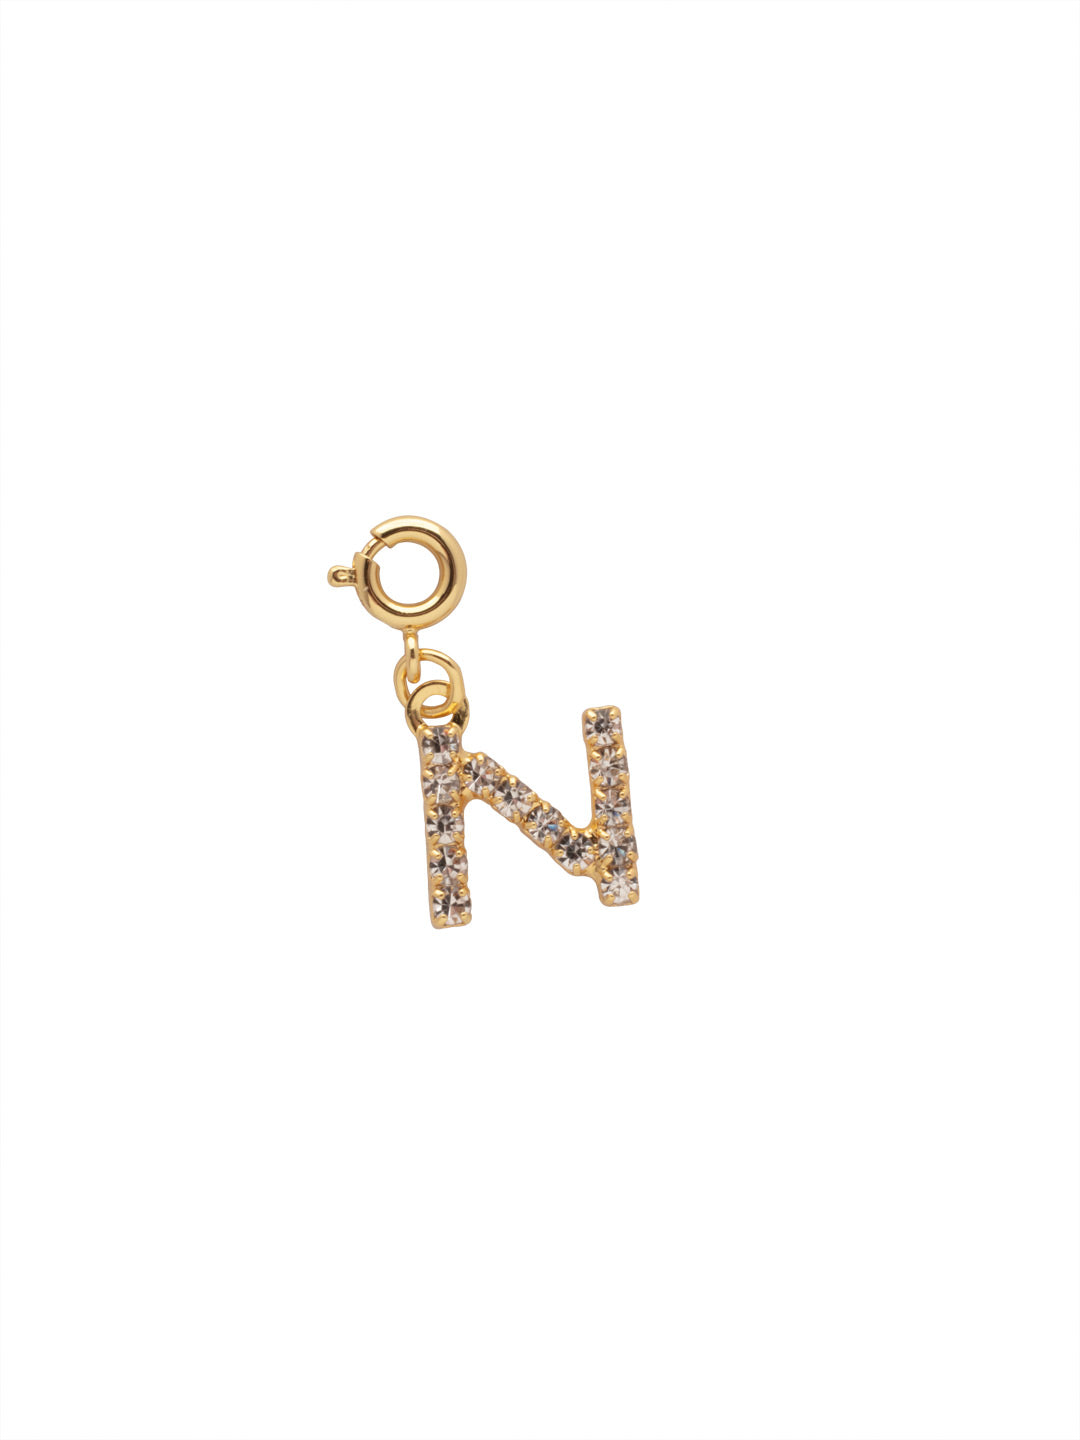 "N" Initial Charm - CFB14BGCRY - <p>The Initial Charm features a metal letter embellished with small round crystals and a small spring ring clasp. From Sorrelli's Crystal collection in our Bright Gold-tone finish.</p>